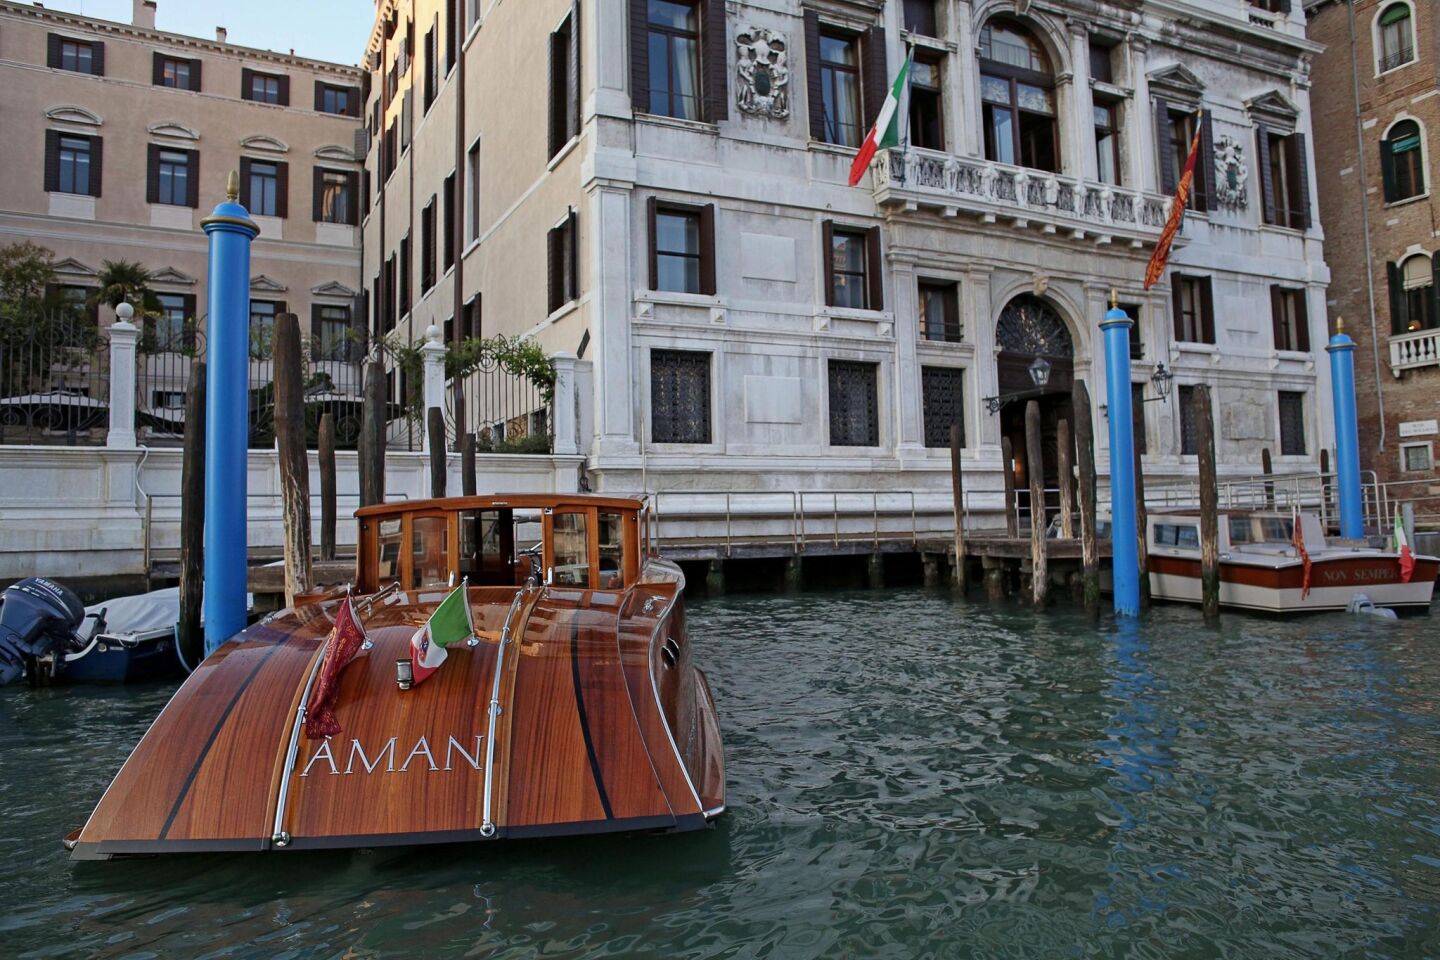 The exterior of the seven-star Aman Canal Grande hotel in Venice, Italy. The George Clooney-Amal Alamuddin wedding is expected to happen hre Saturday night.